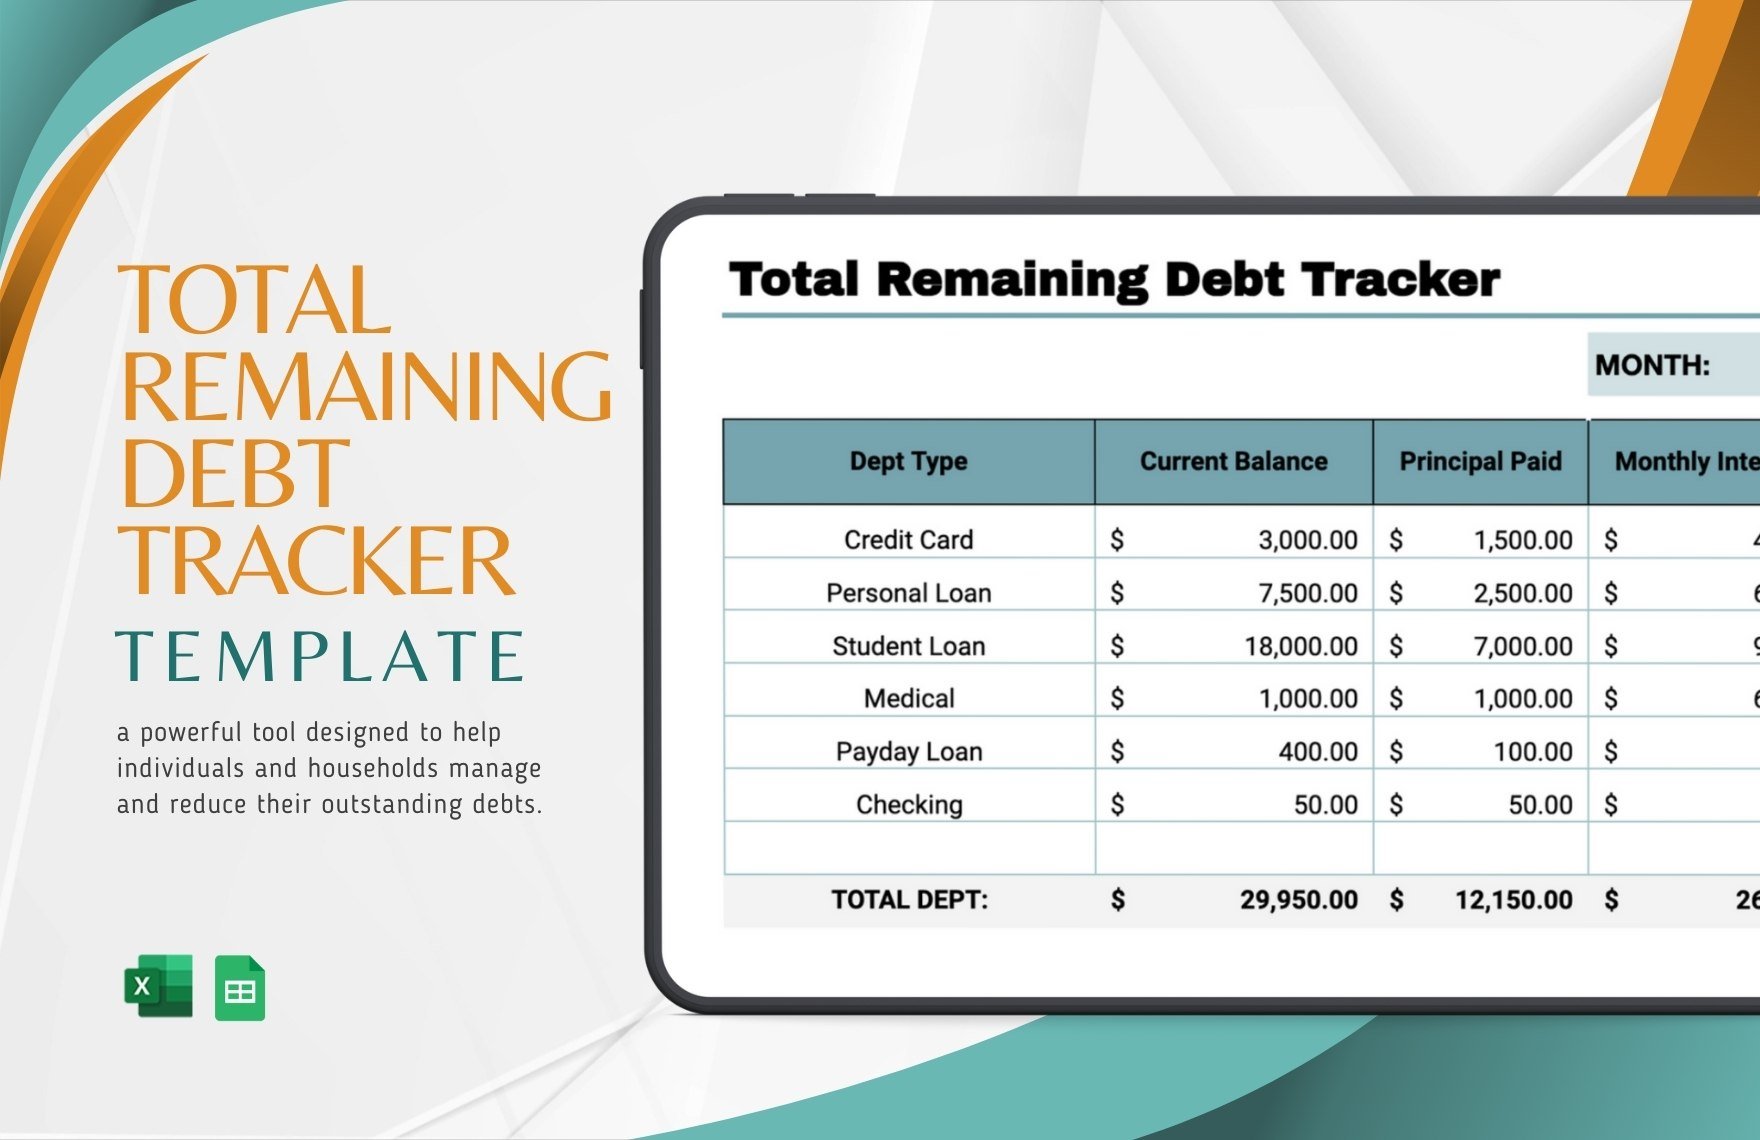 Total Remaining Debt Tracker Template